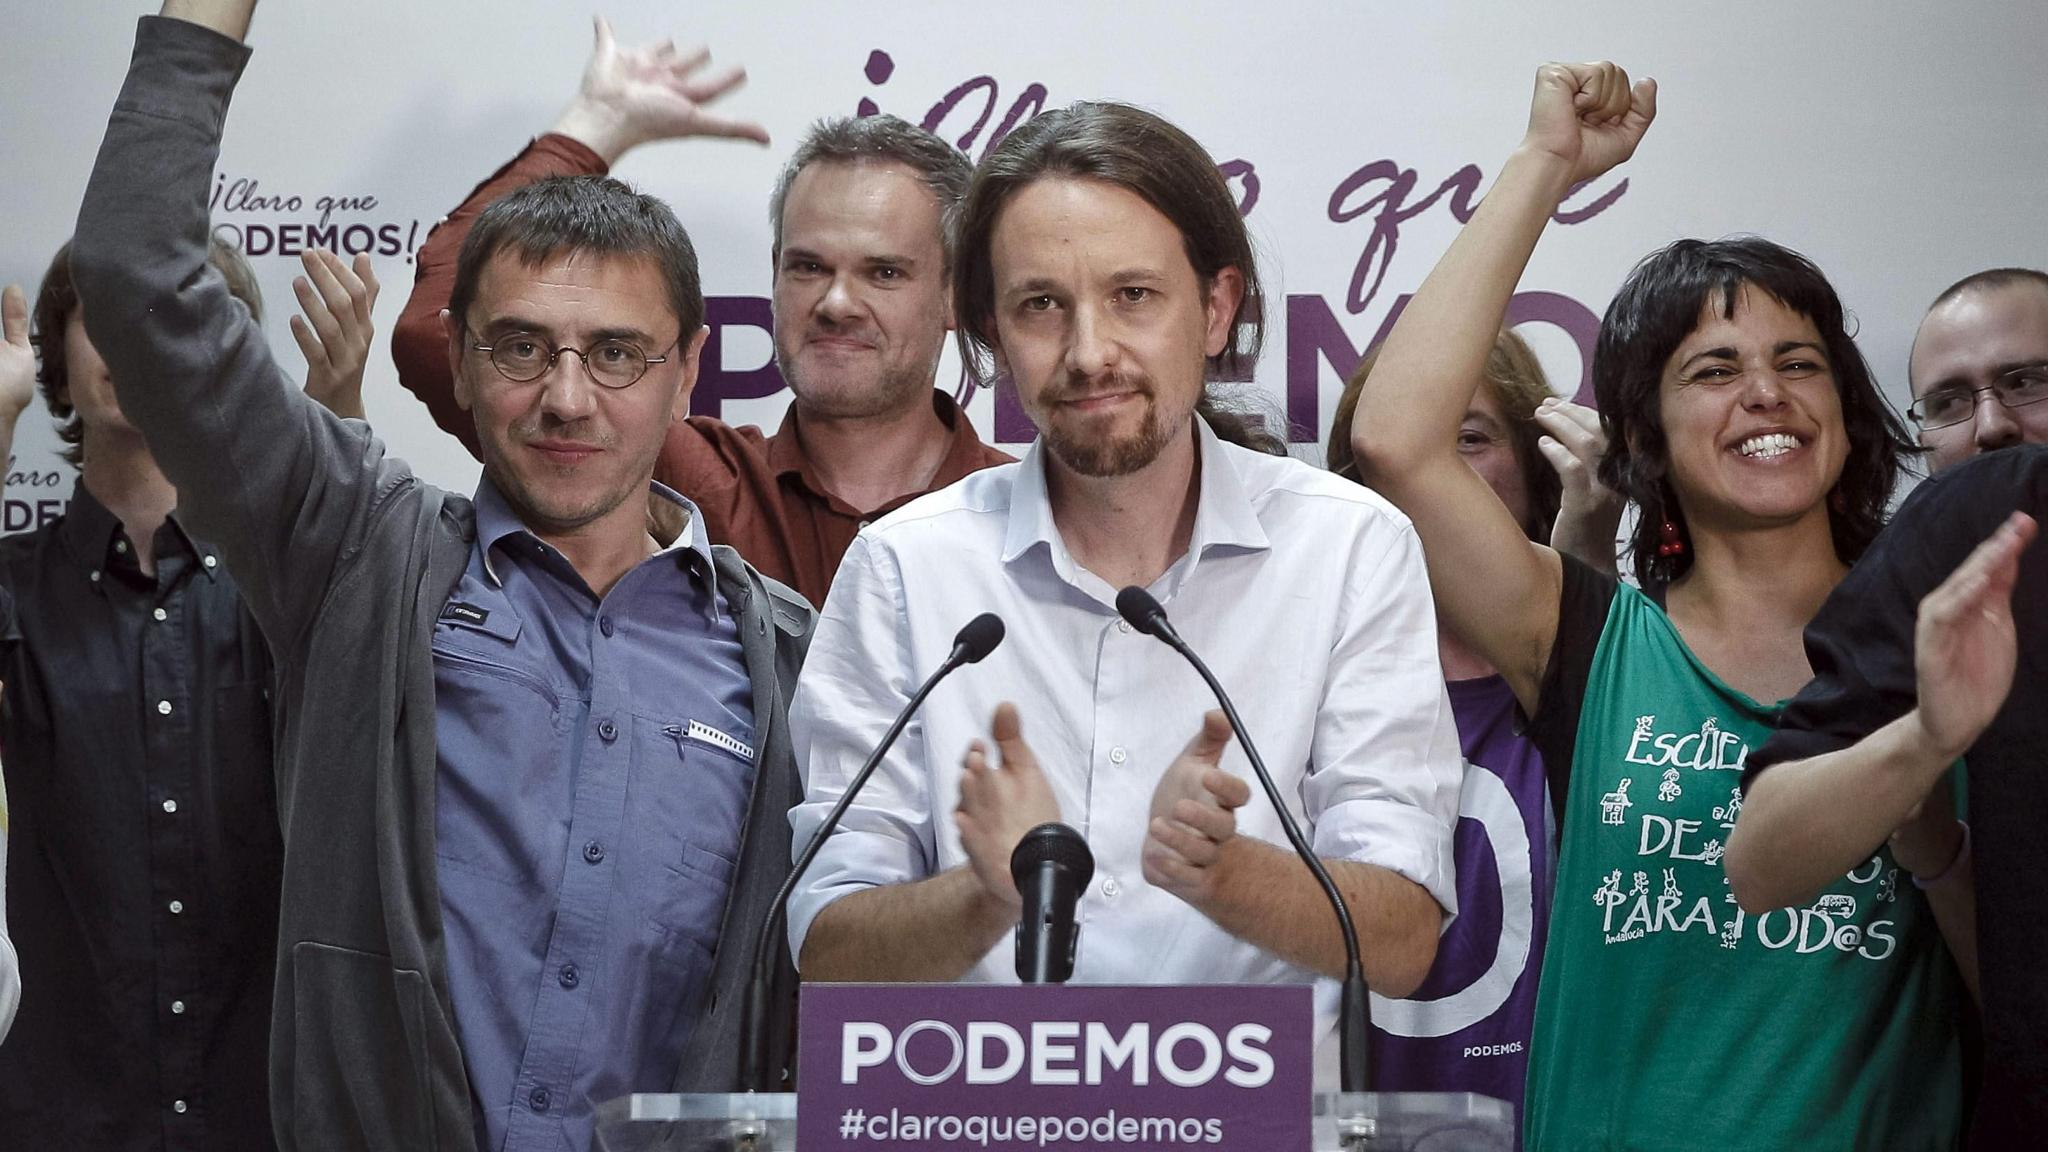 Pablo Iglesias, the head of the electoral slate for the new Podemos party, with his Podemos party followers after electoral success in May 2014. Photo by: Emilio Naranjo (EFE)